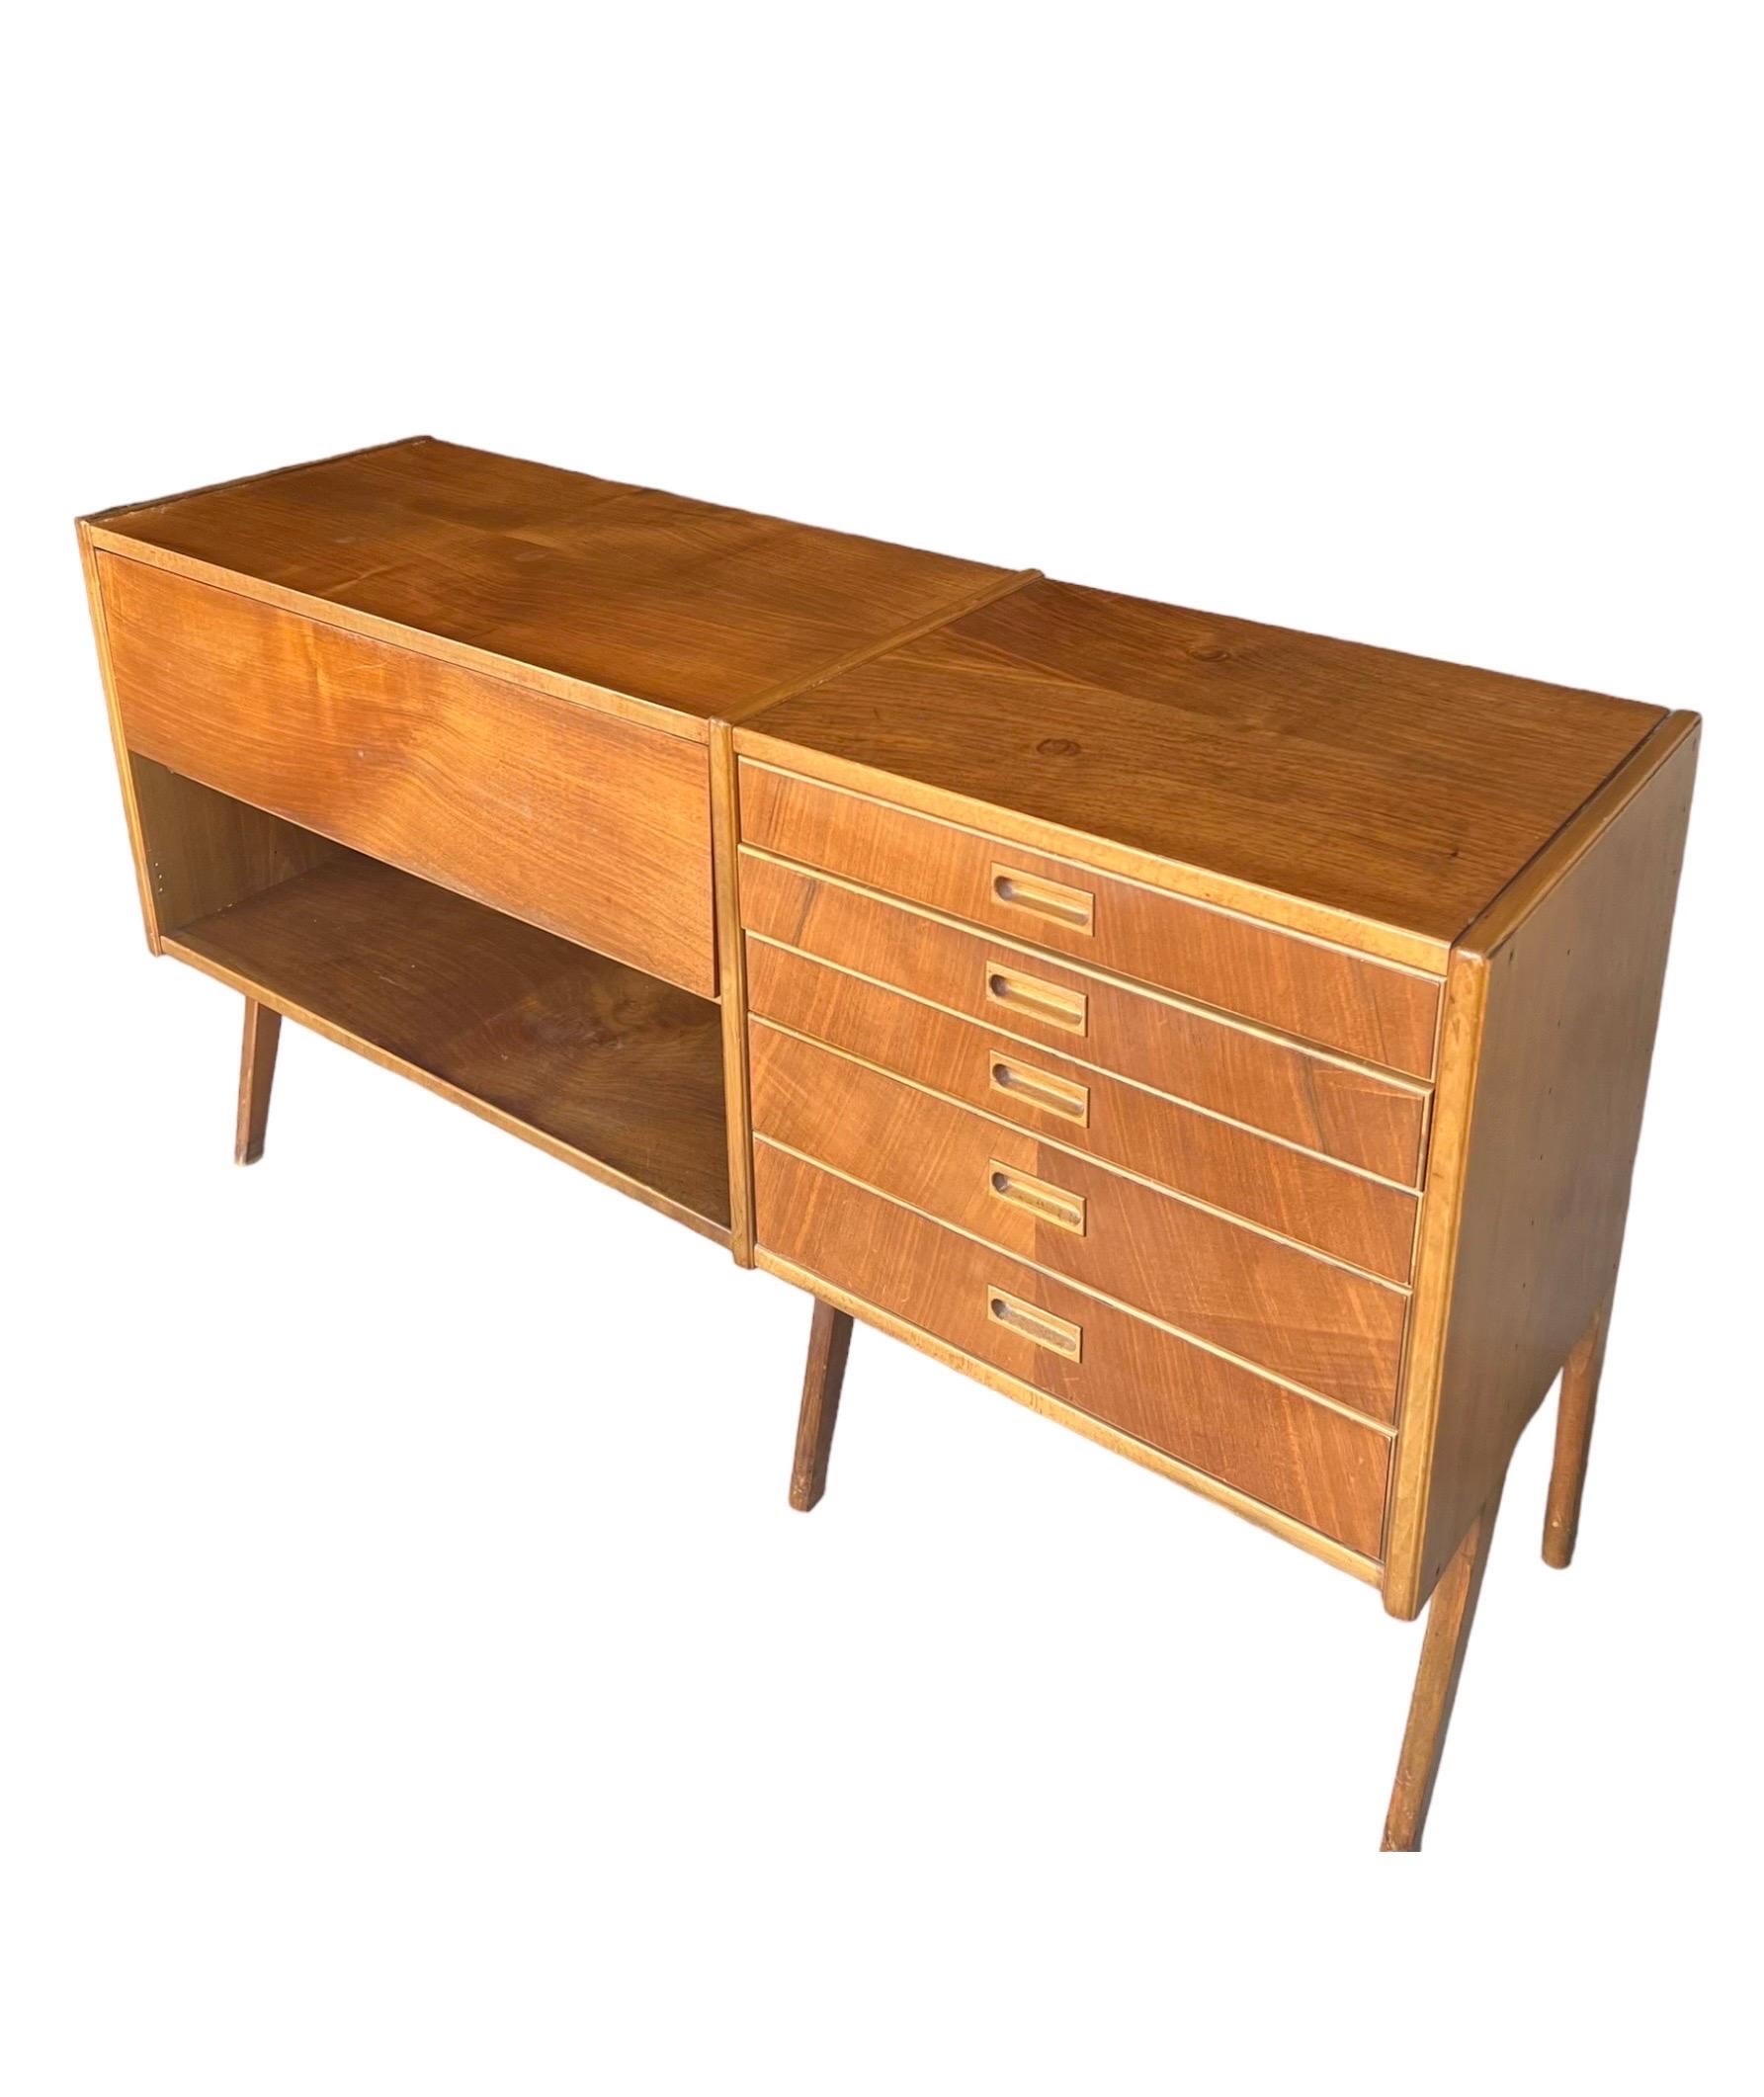 Late 20th Century Vintage Mid Century Modern Teak Wood Credenza or Buffet Made in Sweden  For Sale